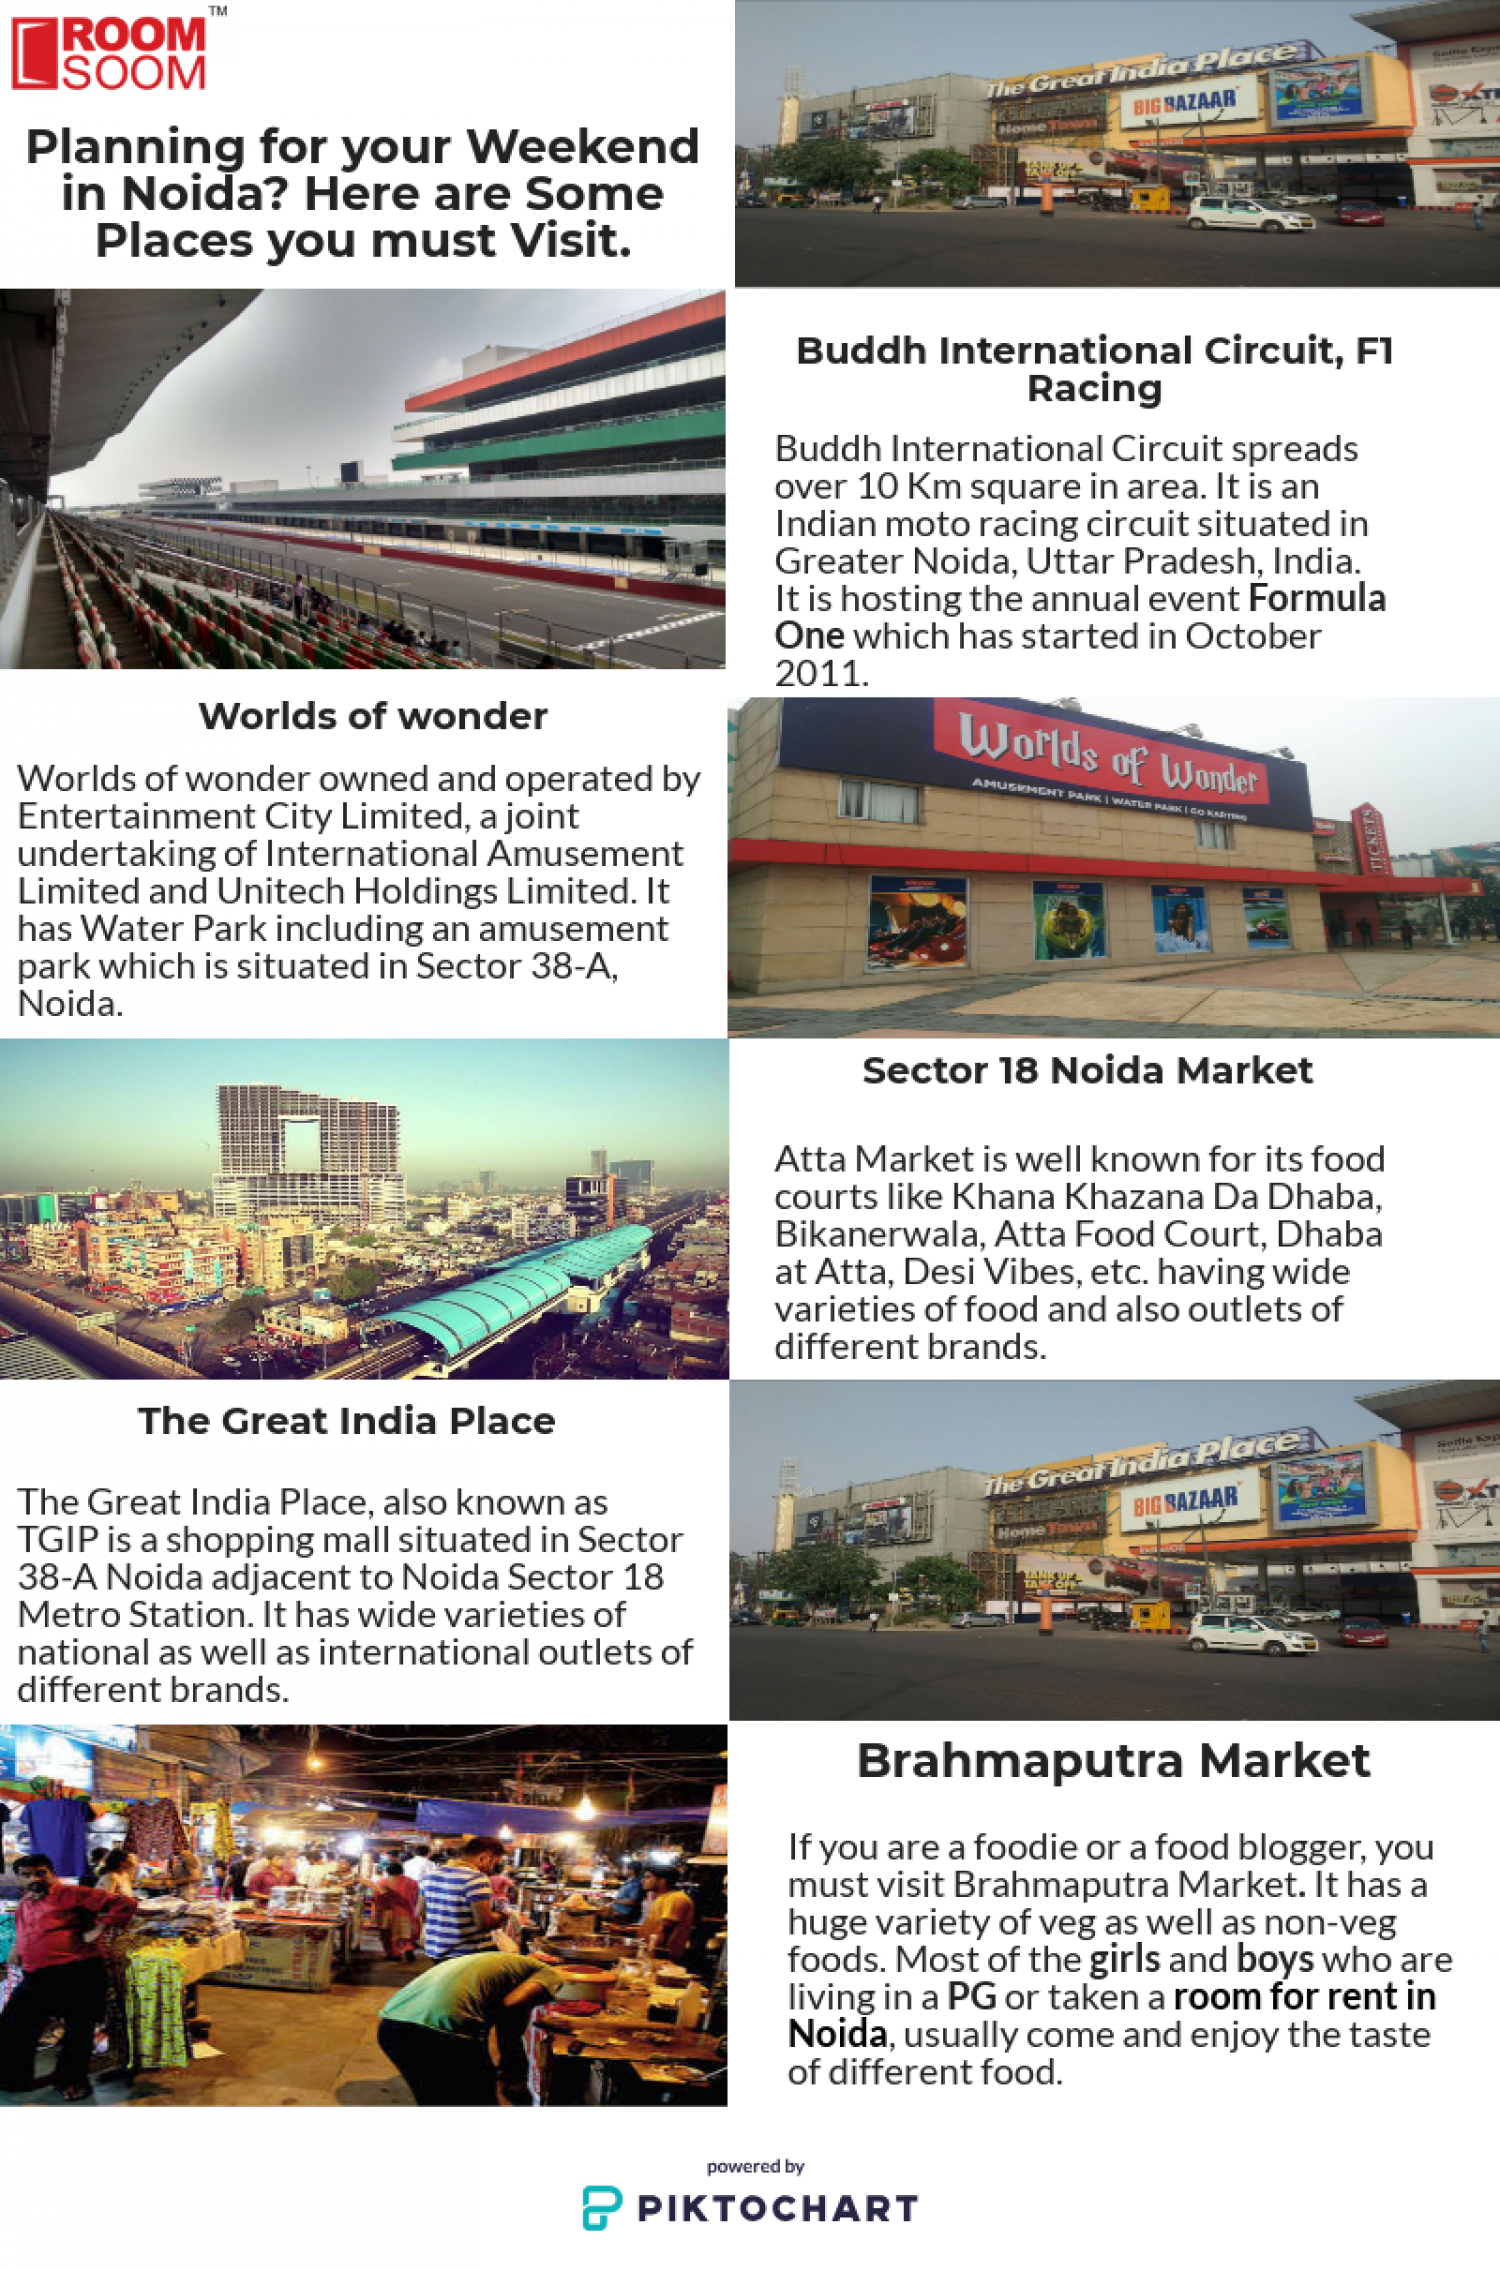 Planning for your Weekend in Noida? Here are Some Places you must Visit. Infographic